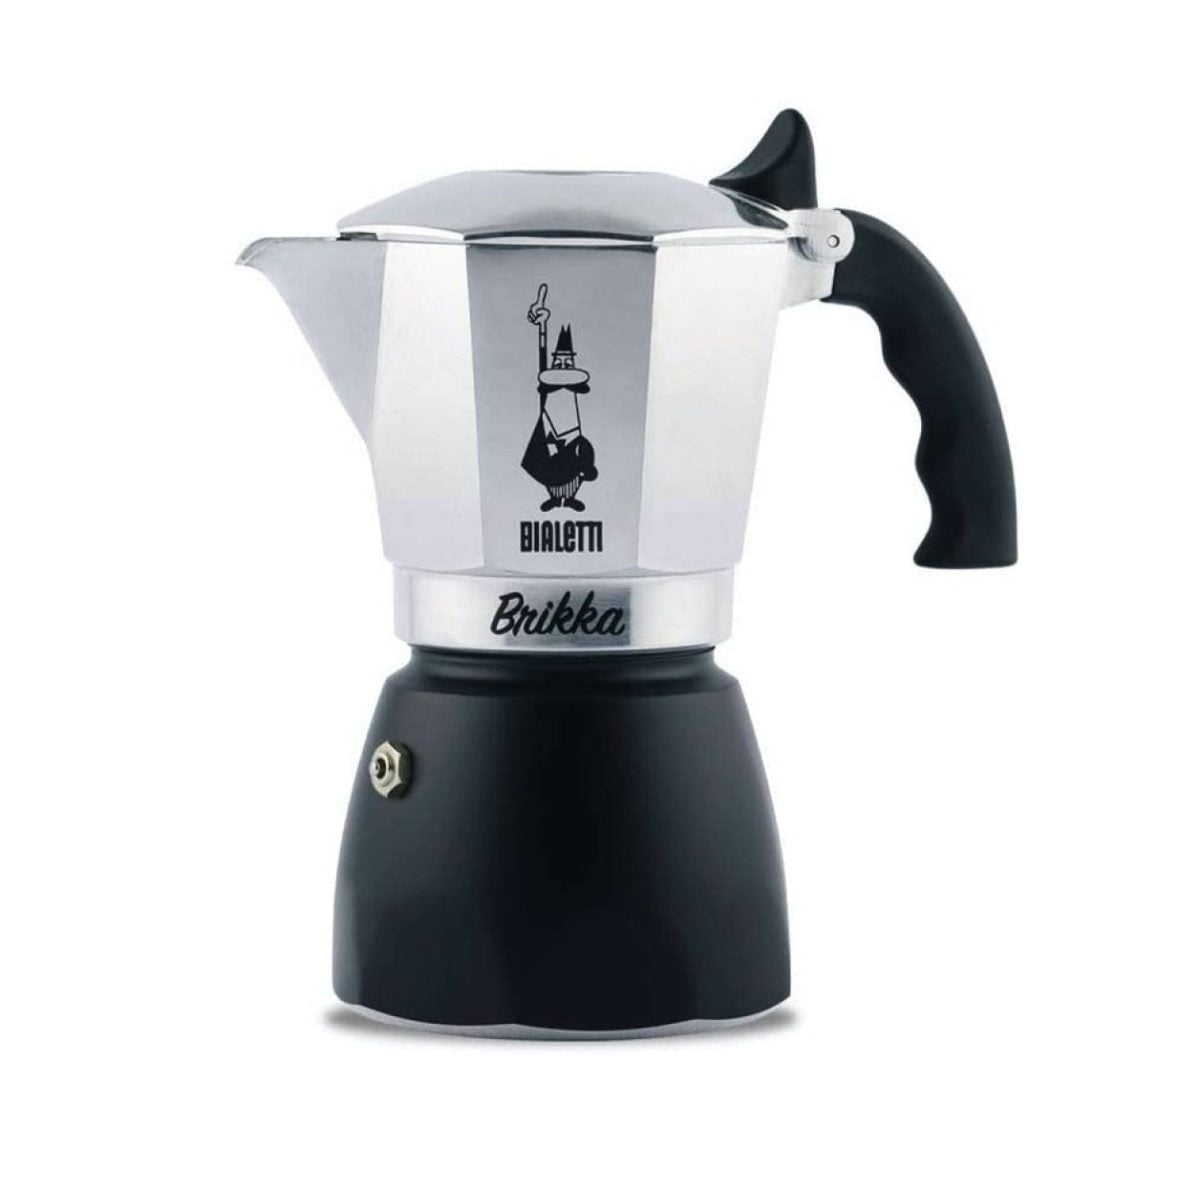 0042498 Bialetti Moka Pot Brikka 4 Cup 1000X1000 1 Bialetti &Amp;Lt;H1&Amp;Gt;Bialetti Moka Pot Brikka 2 Cup - Espresso Coffee&Amp;Lt;/H1&Amp;Gt; The Brikka Model, Which Has The Most Special Place Among The Bialetti Moka Pots, Works At Higher Pressure Thanks To Its Special Design, Thus Allowing You To Enjoy A Creamy, Foamy And Intense Coffee. &Amp;Lt;Strong&Amp;Gt;It Consists Of Three Parts:&Amp;Lt;/Strong&Amp;Gt; The Bottom-Up Water Reservoir, The Filter Where You Will Put The Ground Coffee And The Reservoir Where The Espresso Will Be Filled. &Amp;Lt;Ul&Amp;Gt; &Amp;Lt;Li&Amp;Gt;Made Of Aluminium Casting Material.&Amp;Lt;/Li&Amp;Gt; &Amp;Lt;Li&Amp;Gt;You Can Prepare 2 Shots Of Espresso (Approximately 100 Ml).&Amp;Lt;/Li&Amp;Gt; &Amp;Lt;Li&Amp;Gt;Not To Be Washed In The Dishwasher, Can Only Be Cleaned With Water.&Amp;Lt;/Li&Amp;Gt; &Amp;Lt;/Ul&Amp;Gt; Https://Youtu.be/O2Xi-1Ae2Rg Bialetti Moka Pot Bialetti Moka Pot Brikka 2 Cup - Espresso Coffee